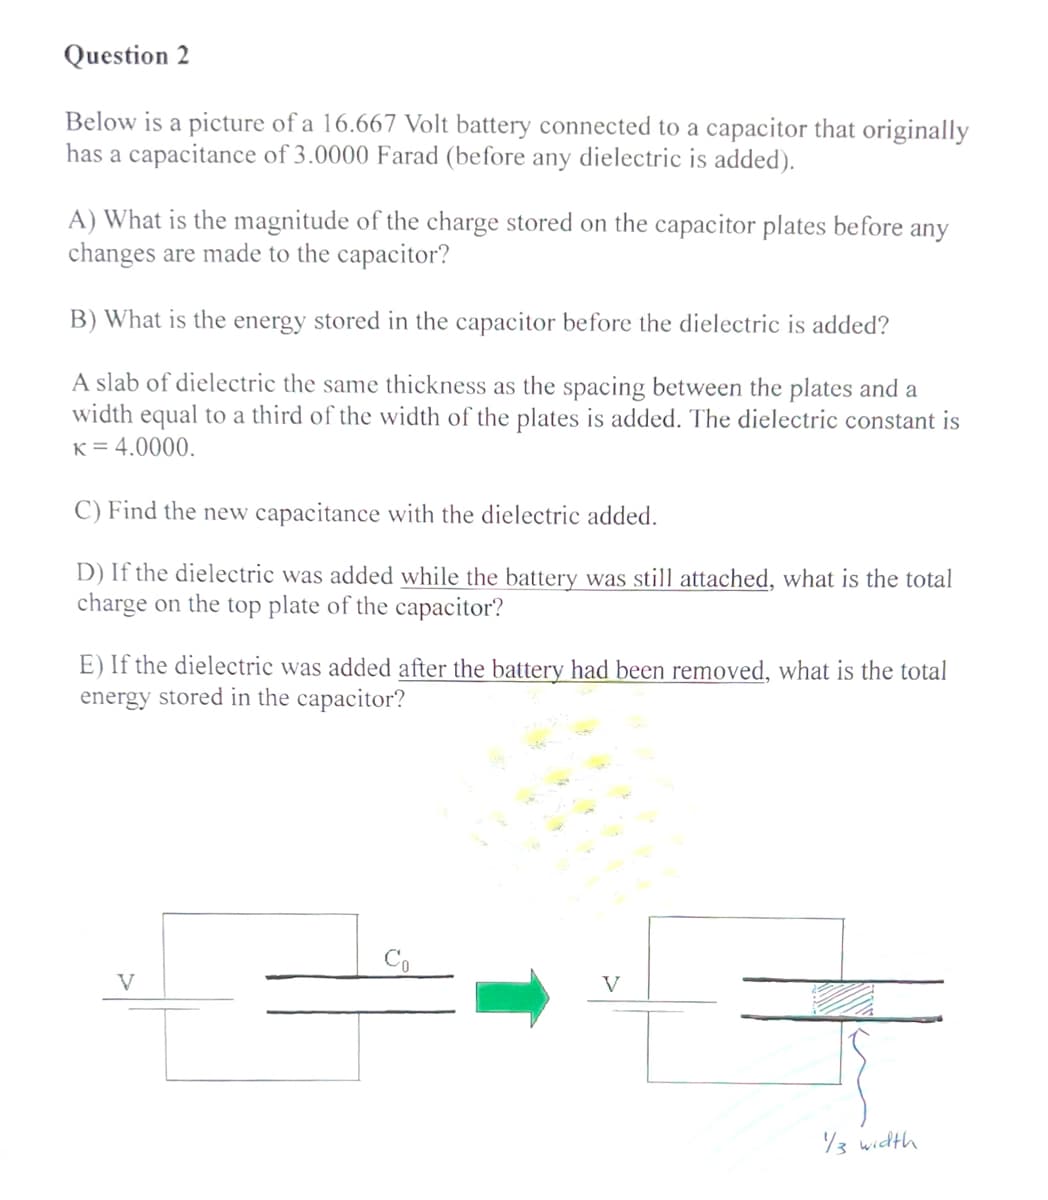 Question 2
Below is a picture of a 16.667 Volt battery connected to a capacitor that originally
has a capacitance of 3.0000 Farad (before any dielectric is added).
A) What is the magnitude of the charge stored on the capacitor plates before any
changes are made to the capacitor?
B) What is the energy stored in the capacitor before the dielectric is added?
A slab of dielectric the same thickness as the spacing between the plates and a
width equal to a third of the width of the plates is added. The dielectric constant is
K = 4.0000.
C) Find the new capacitance with the dielectric added.
D) If the dielectric was added while the battery was still attached, what is the total
charge on the top plate of the capacitor?
E) If the dielectric was added after the battery had been removed, what is the total
energy stored in the capacitor?
V
1/3 width